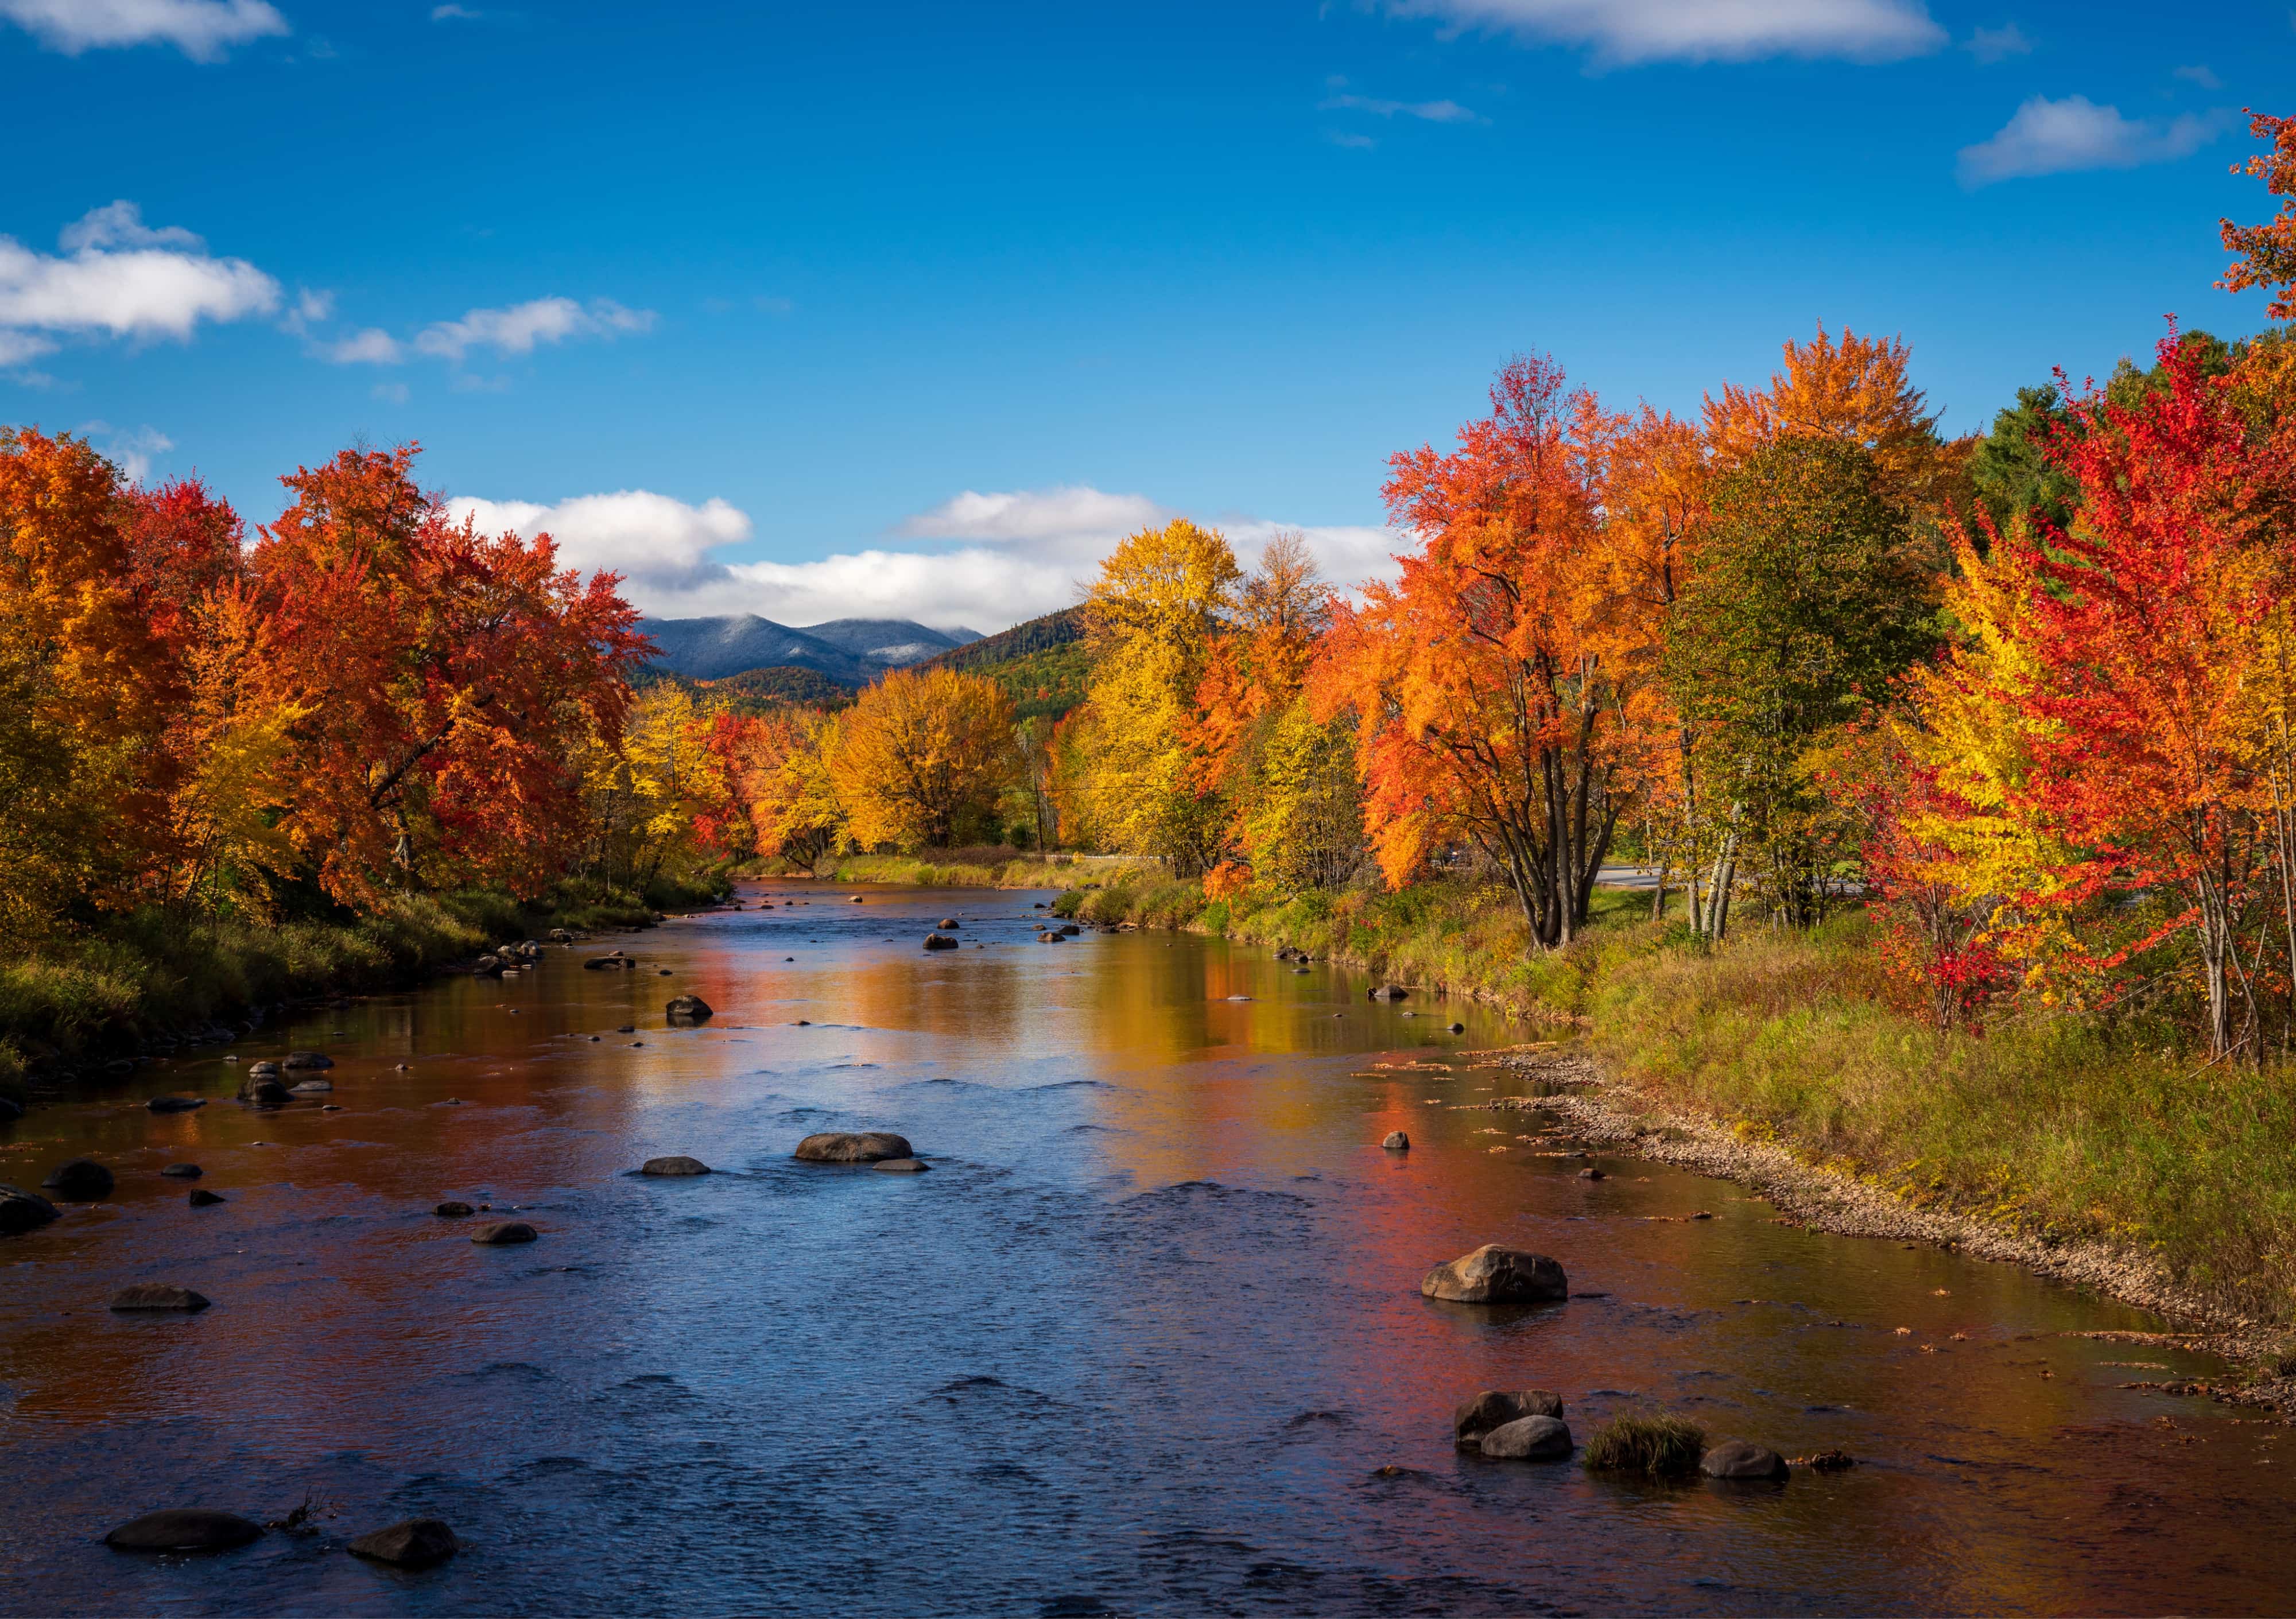 Colorful fall trees around the Saranac river in the Adirondacks in New York State in the autumn